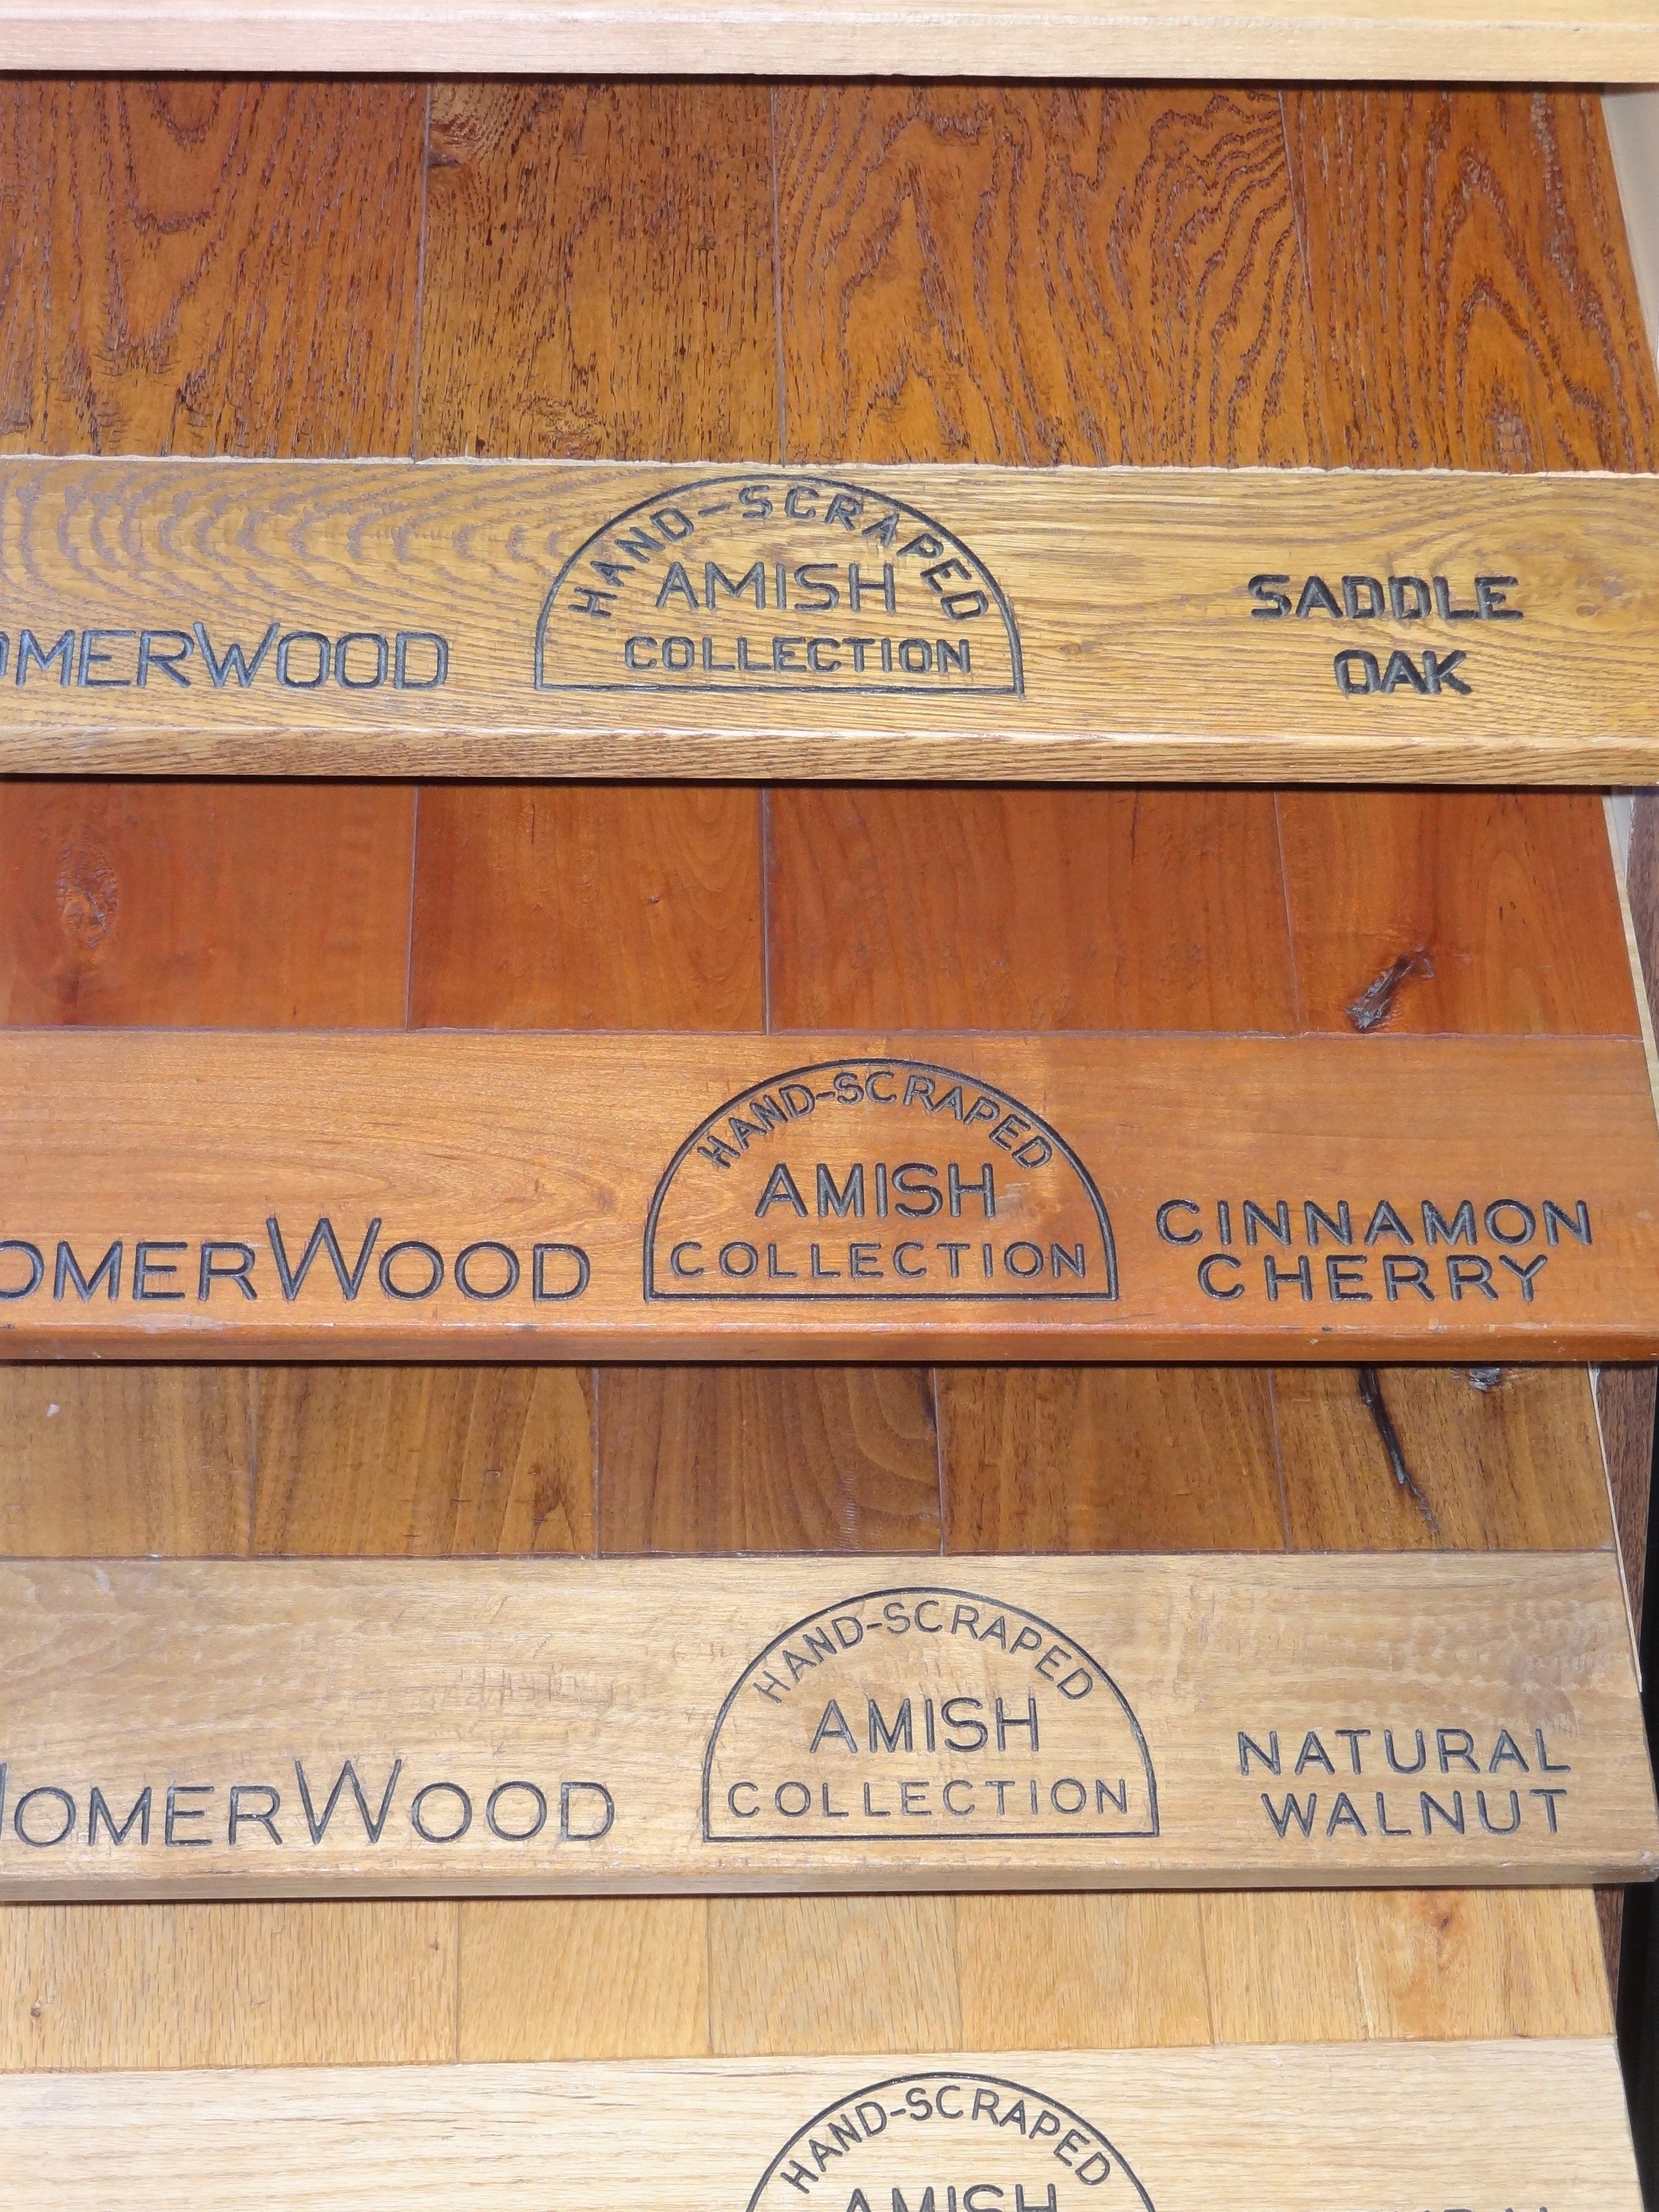 Homer Wood Amish Wood Collection at Carpets and Floors, Inc.